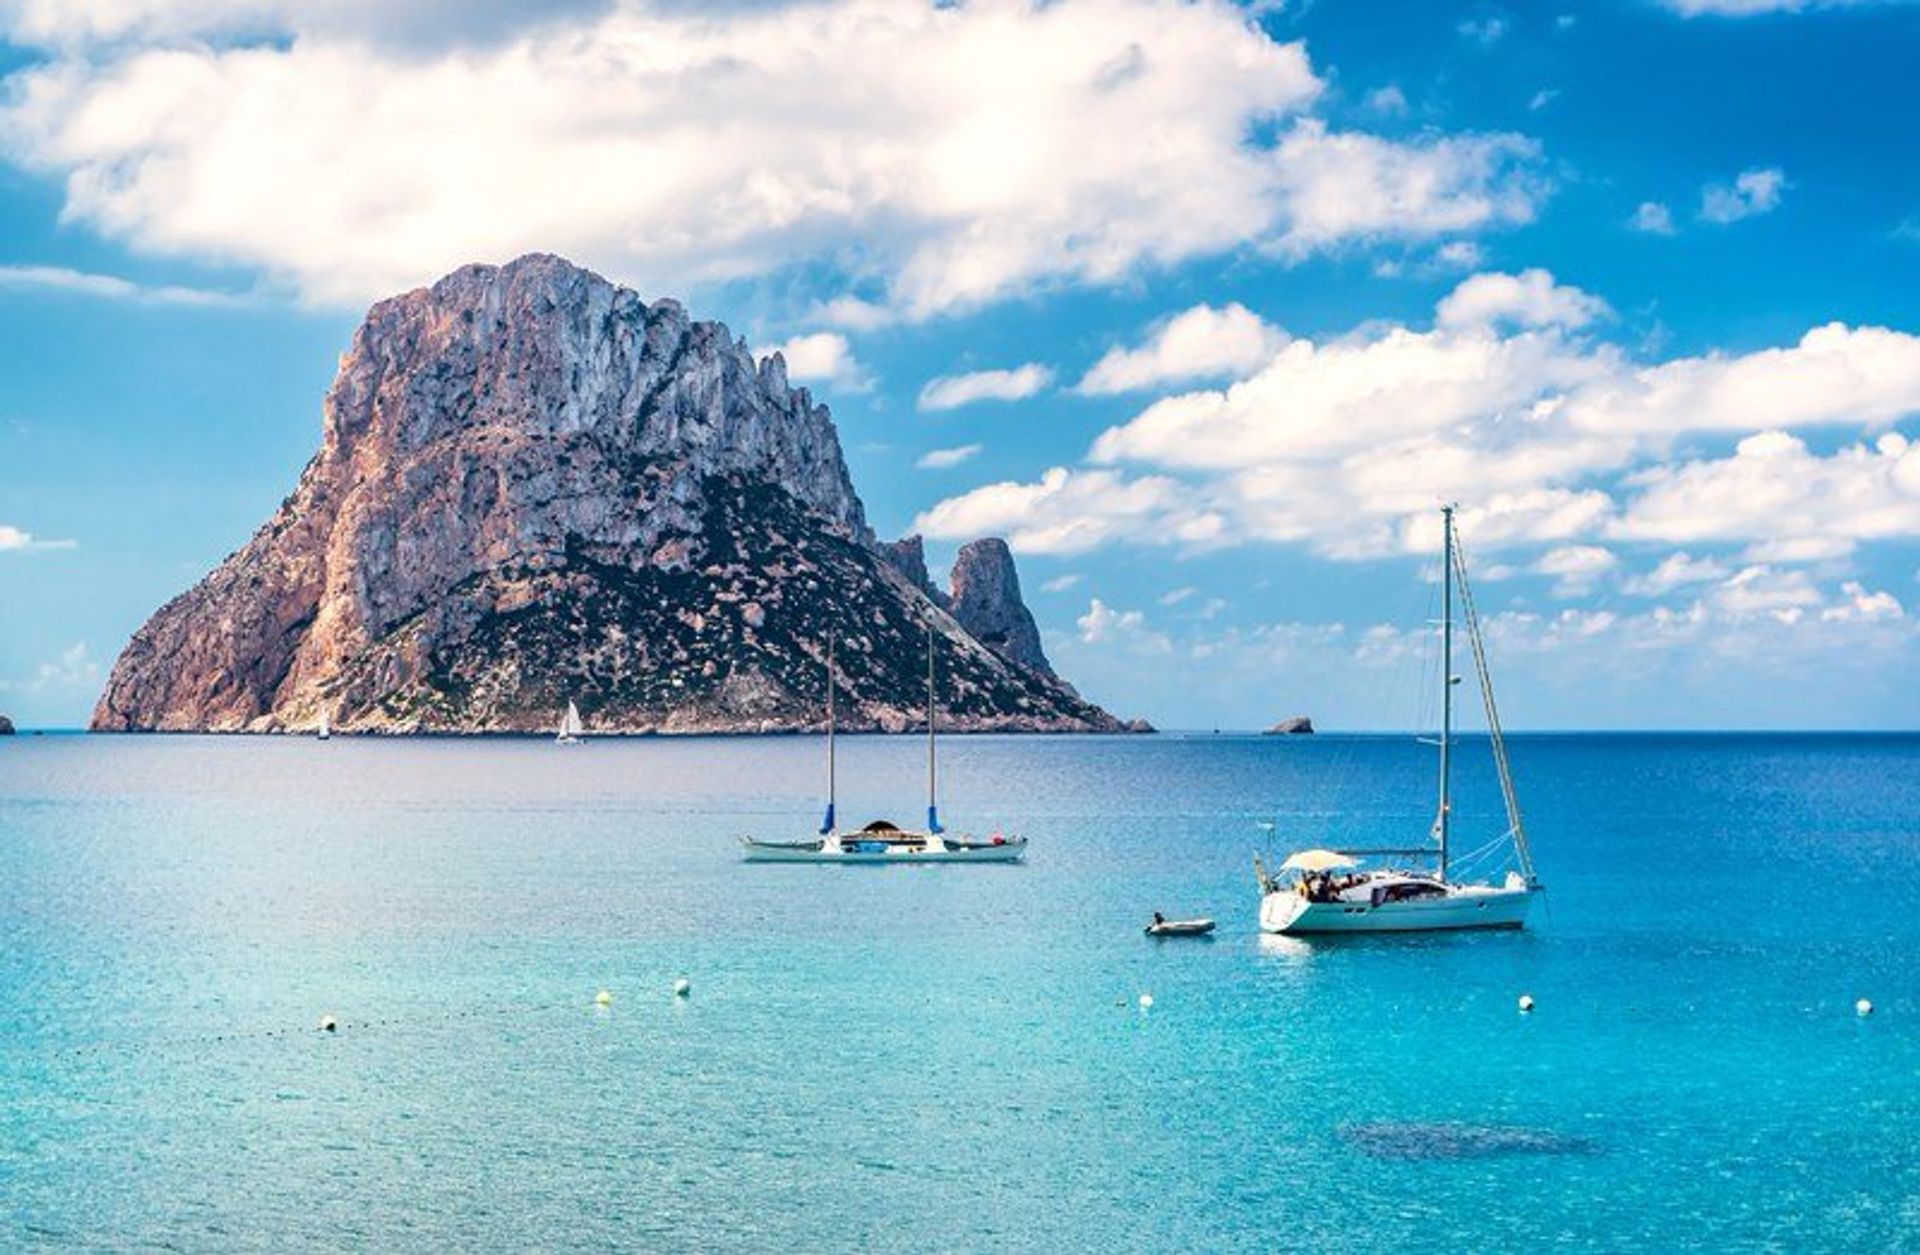 The towering island of Es Vedra reaches 413m above sea level